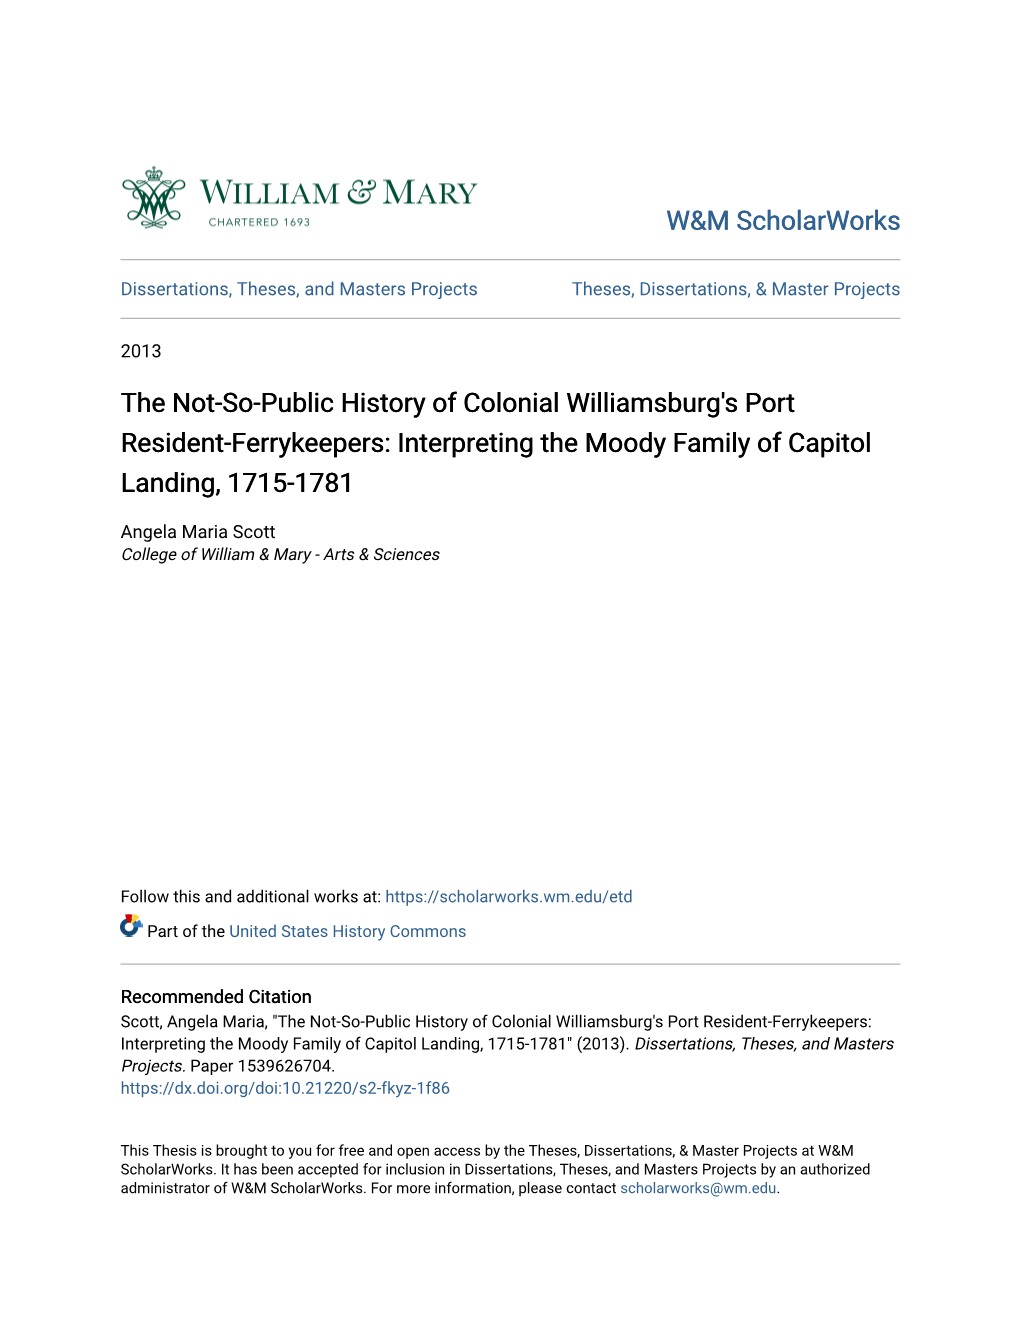 The Not-So-Public History of Colonial Williamsburg's Port Resident-Ferrykeepers: Interpreting the Moody Family of Capitol Landing, 1715-1781